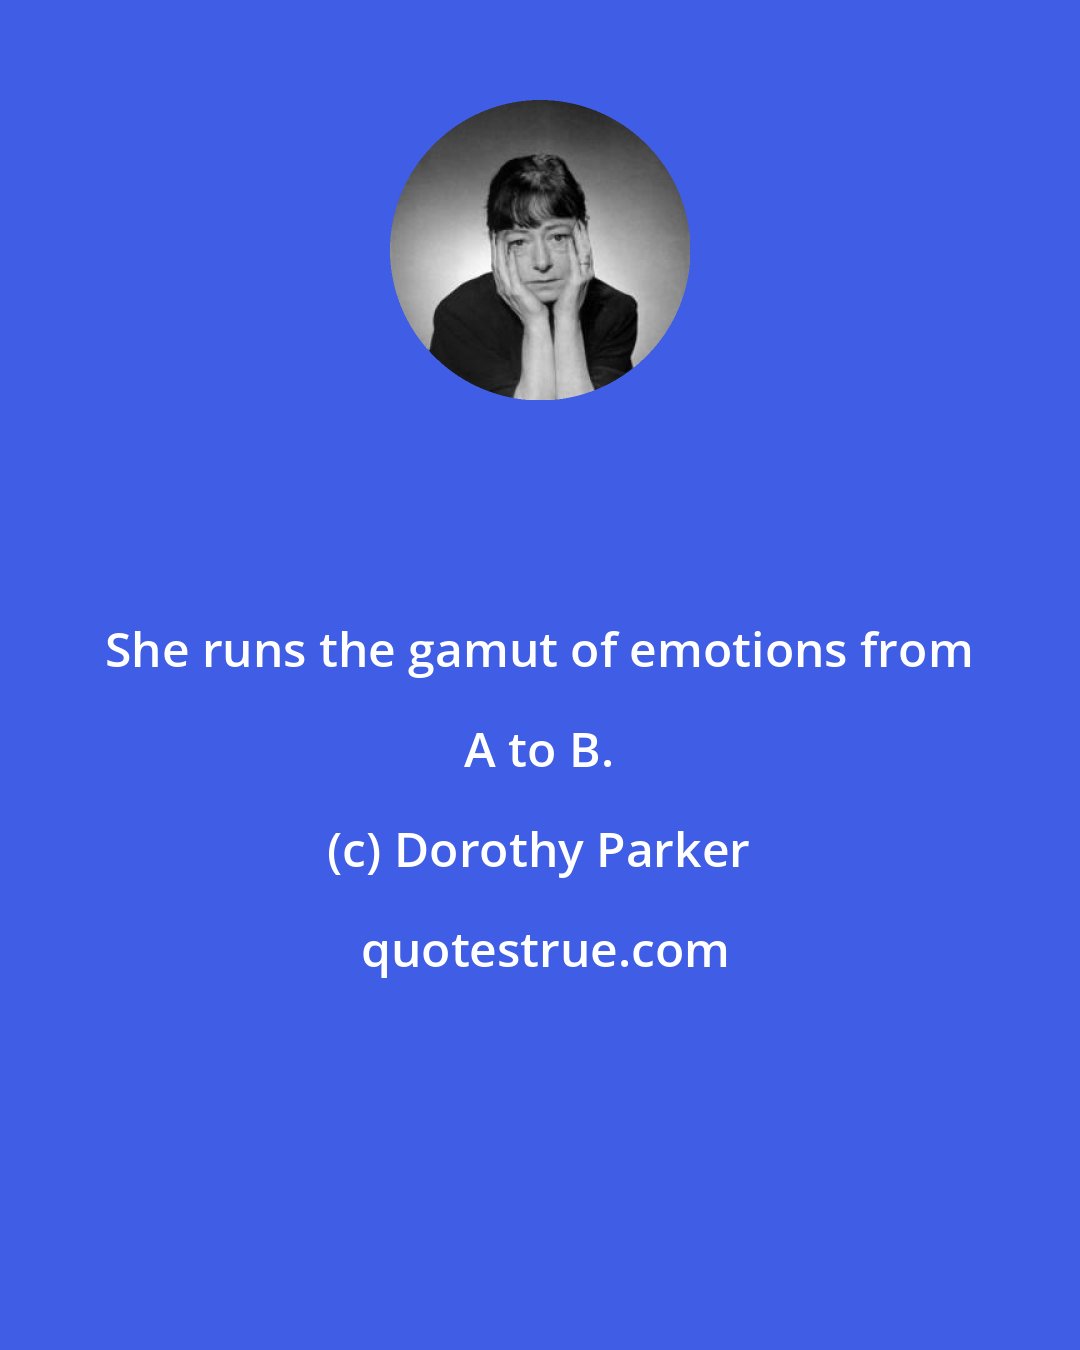 Dorothy Parker: She runs the gamut of emotions from A to B.